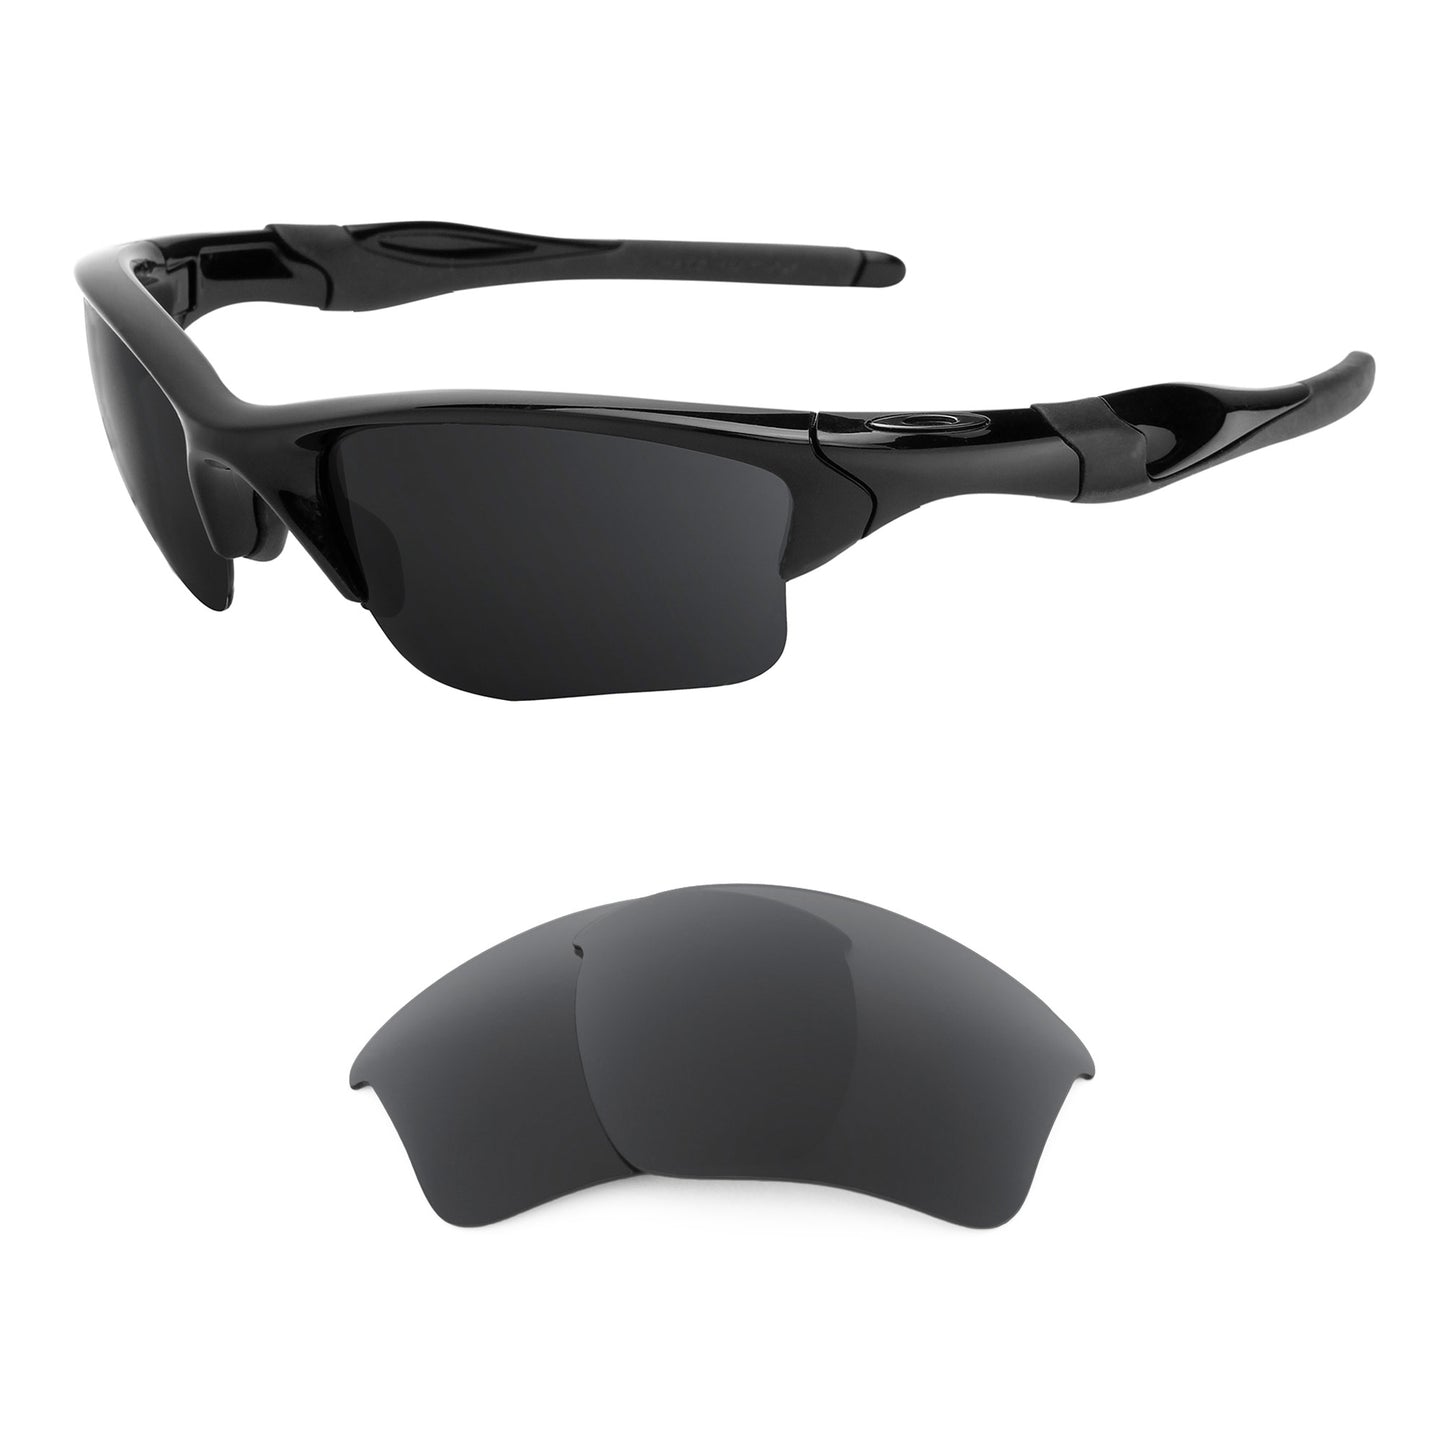 Oakley Half Jacket 2.0 XL sunglasses with replacement lenses